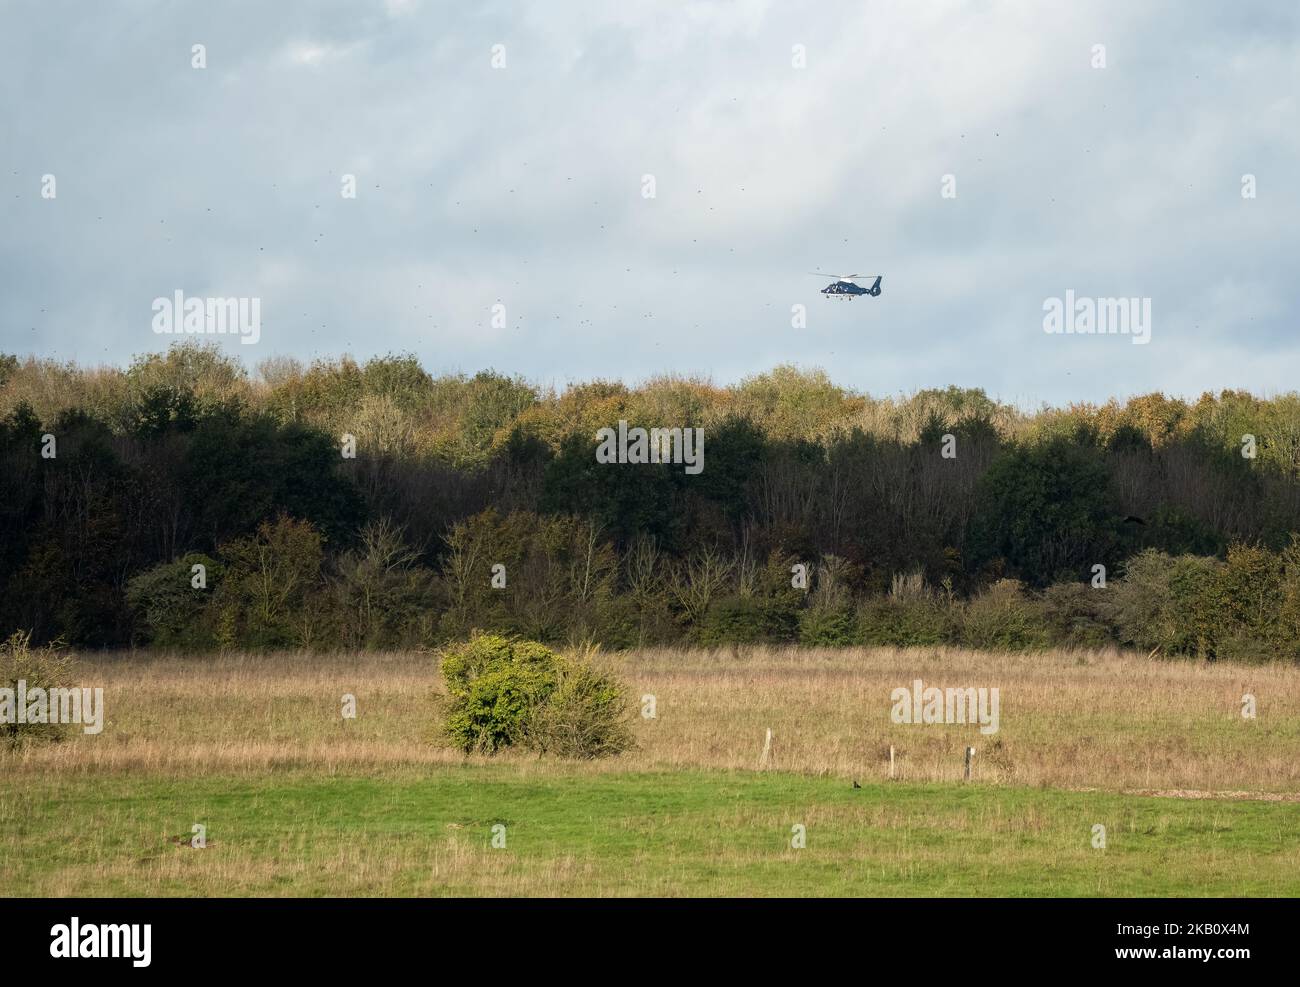 A British SAS Special Air Service Dauphin helicopter (658 squadron, Credenhill) flying low over woodland on a military training exercise, Wiltshire UK Stock Photo